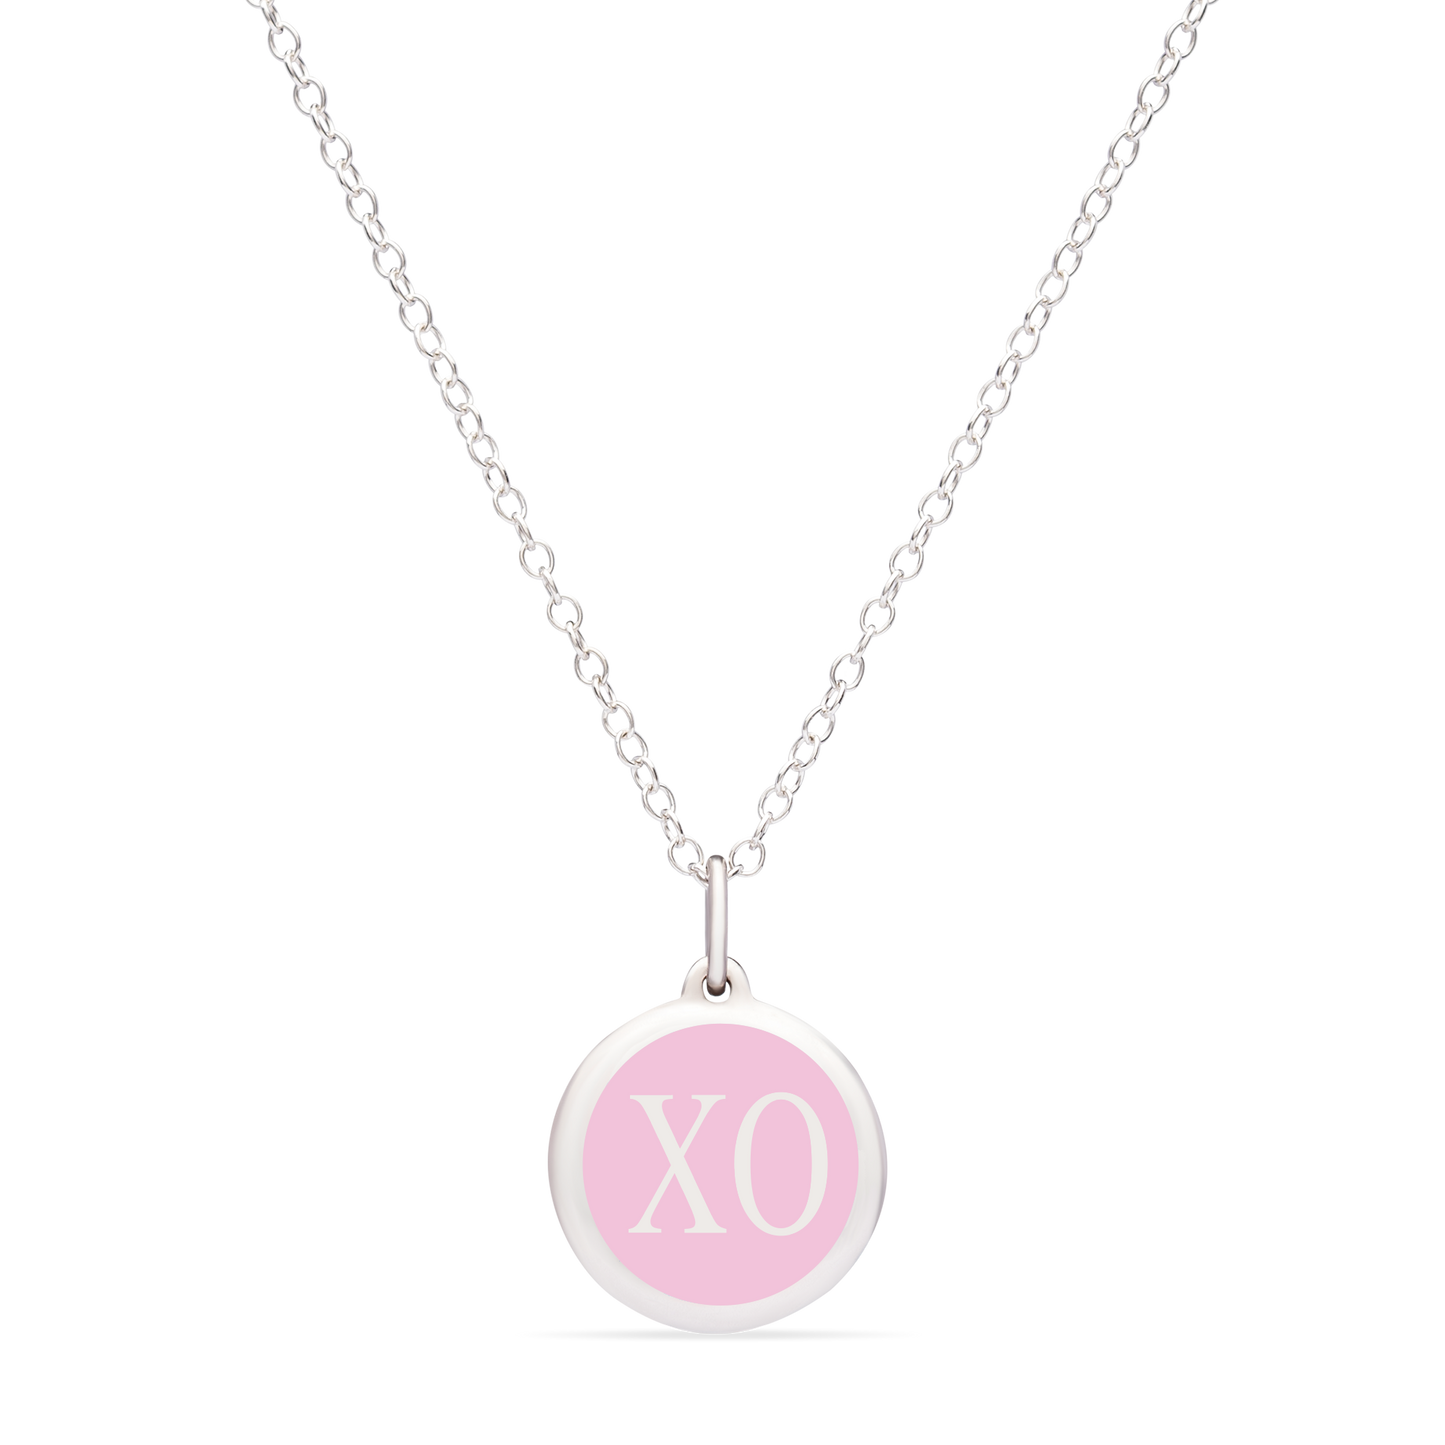 MINI XO CHARM sterling silver with rhodium plate